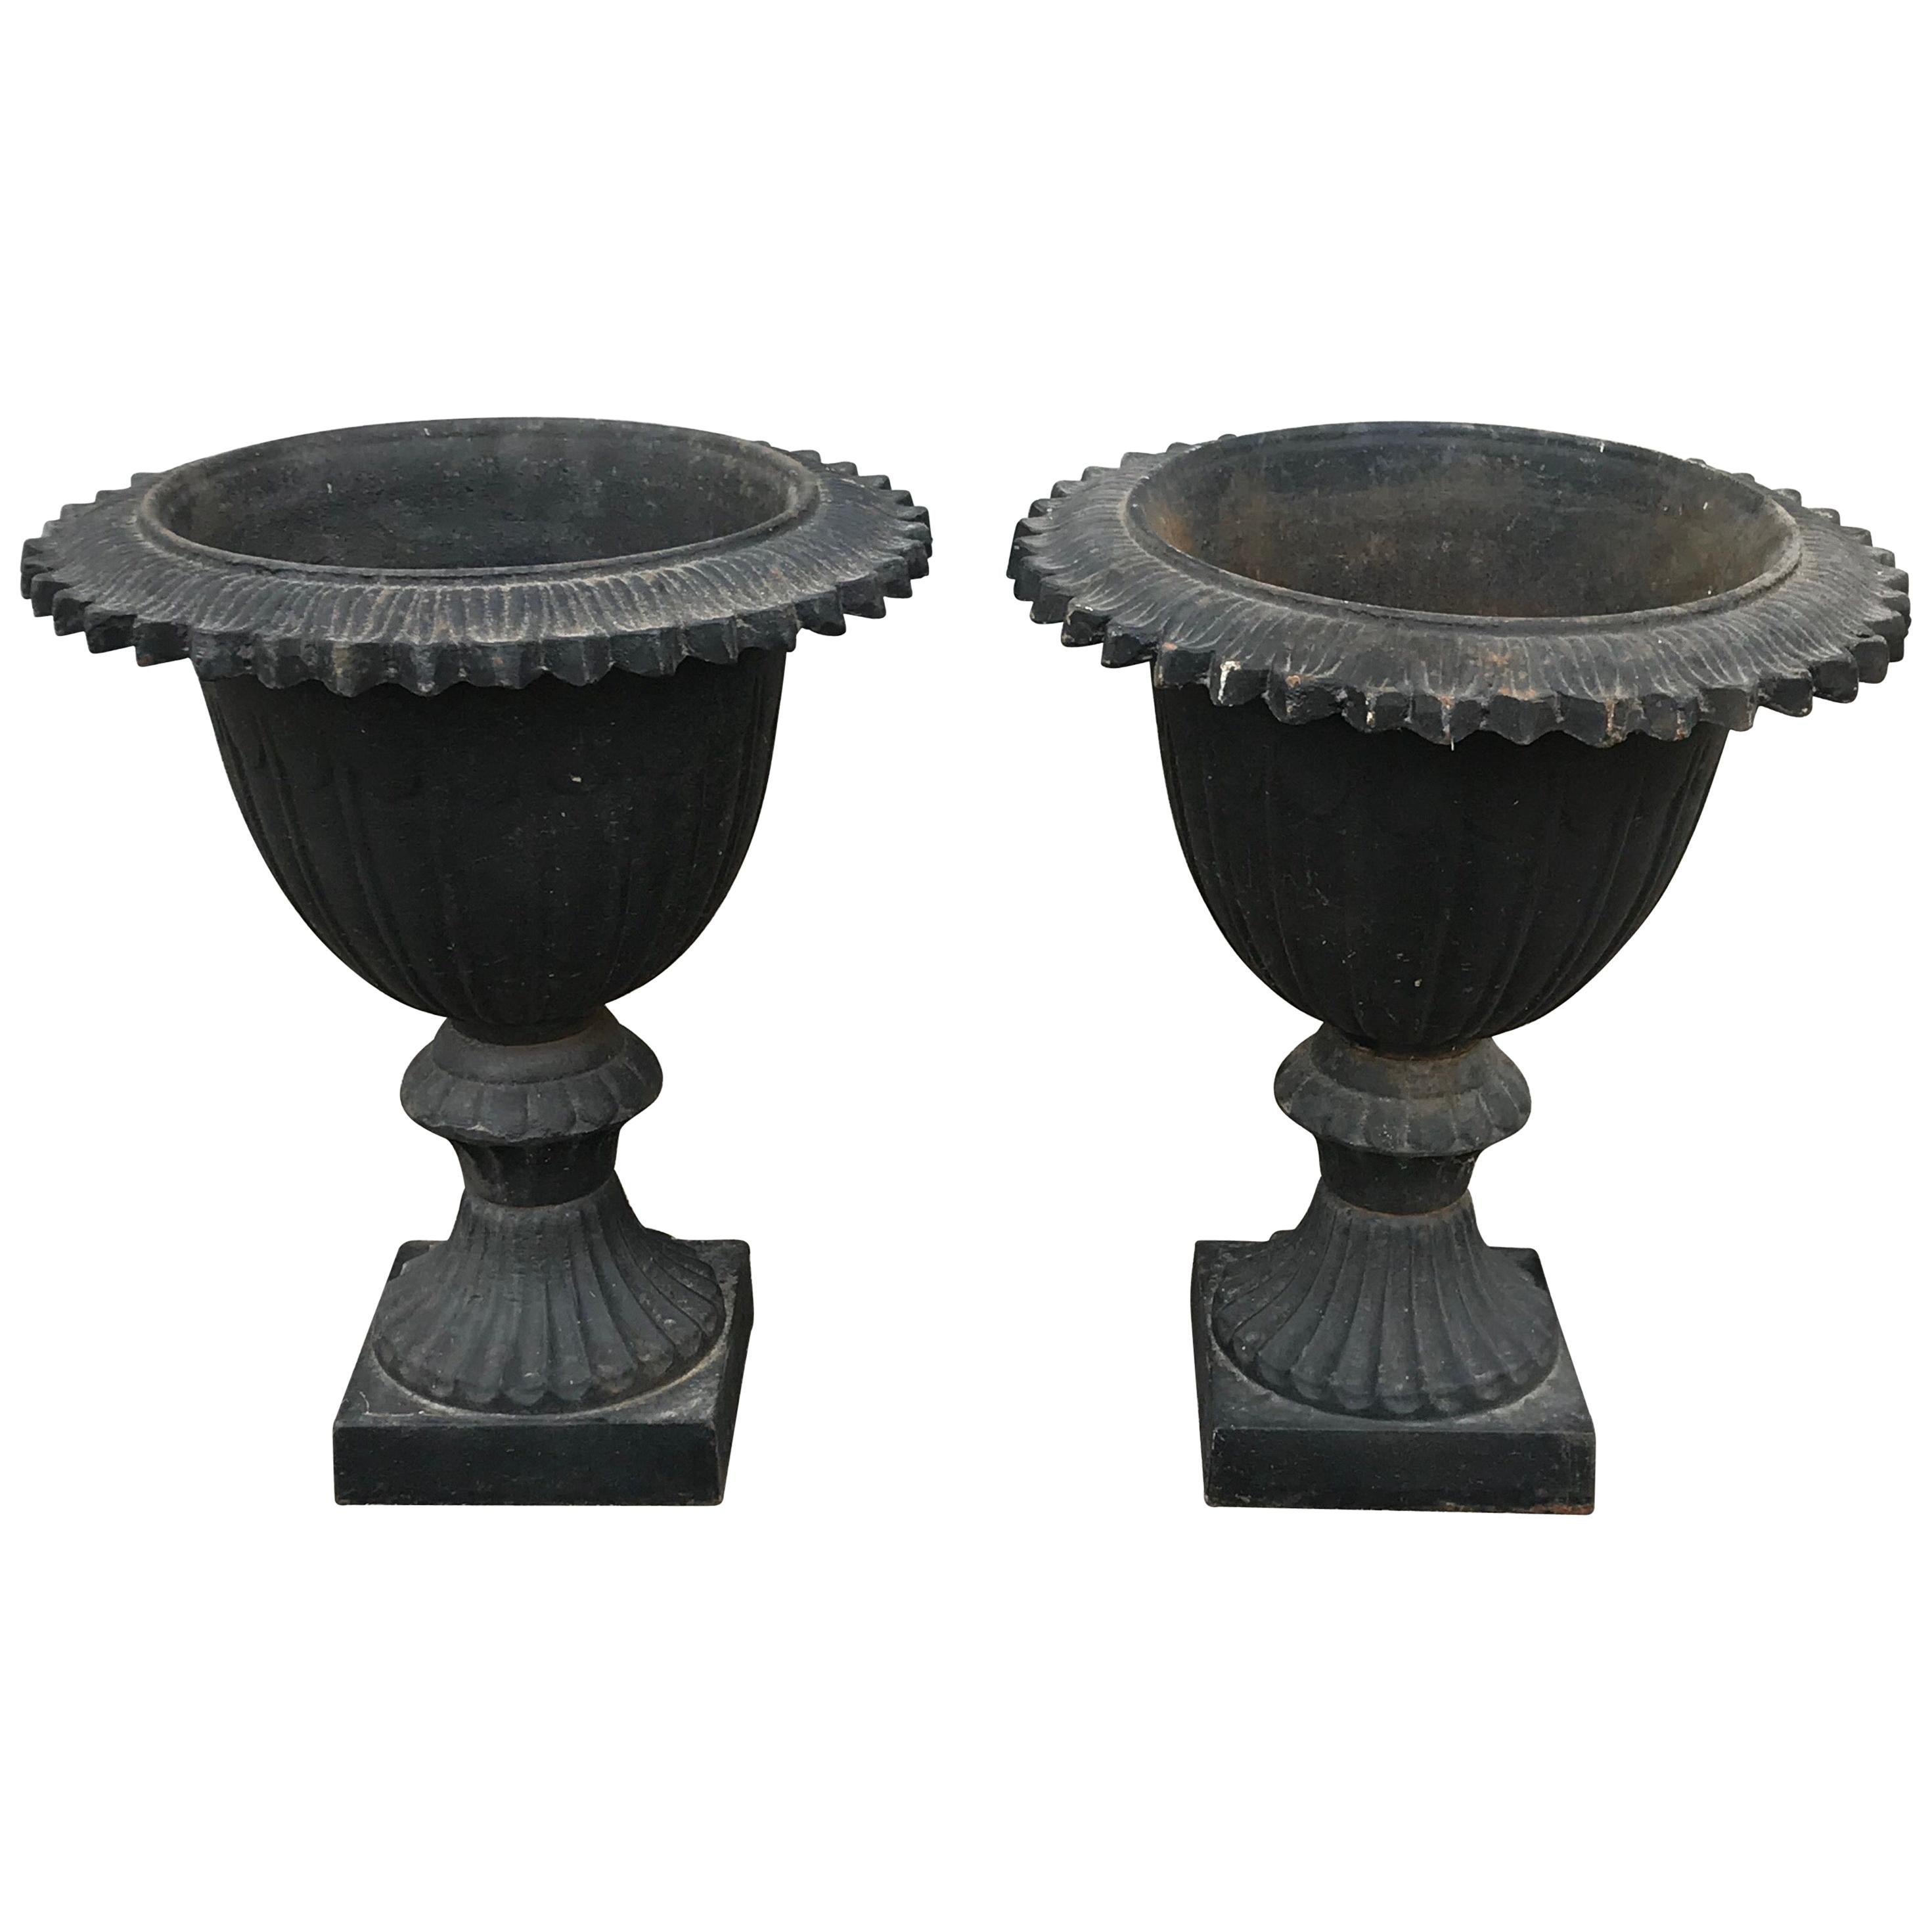 Pair of Early 20th Century Black Cast Iron Urns